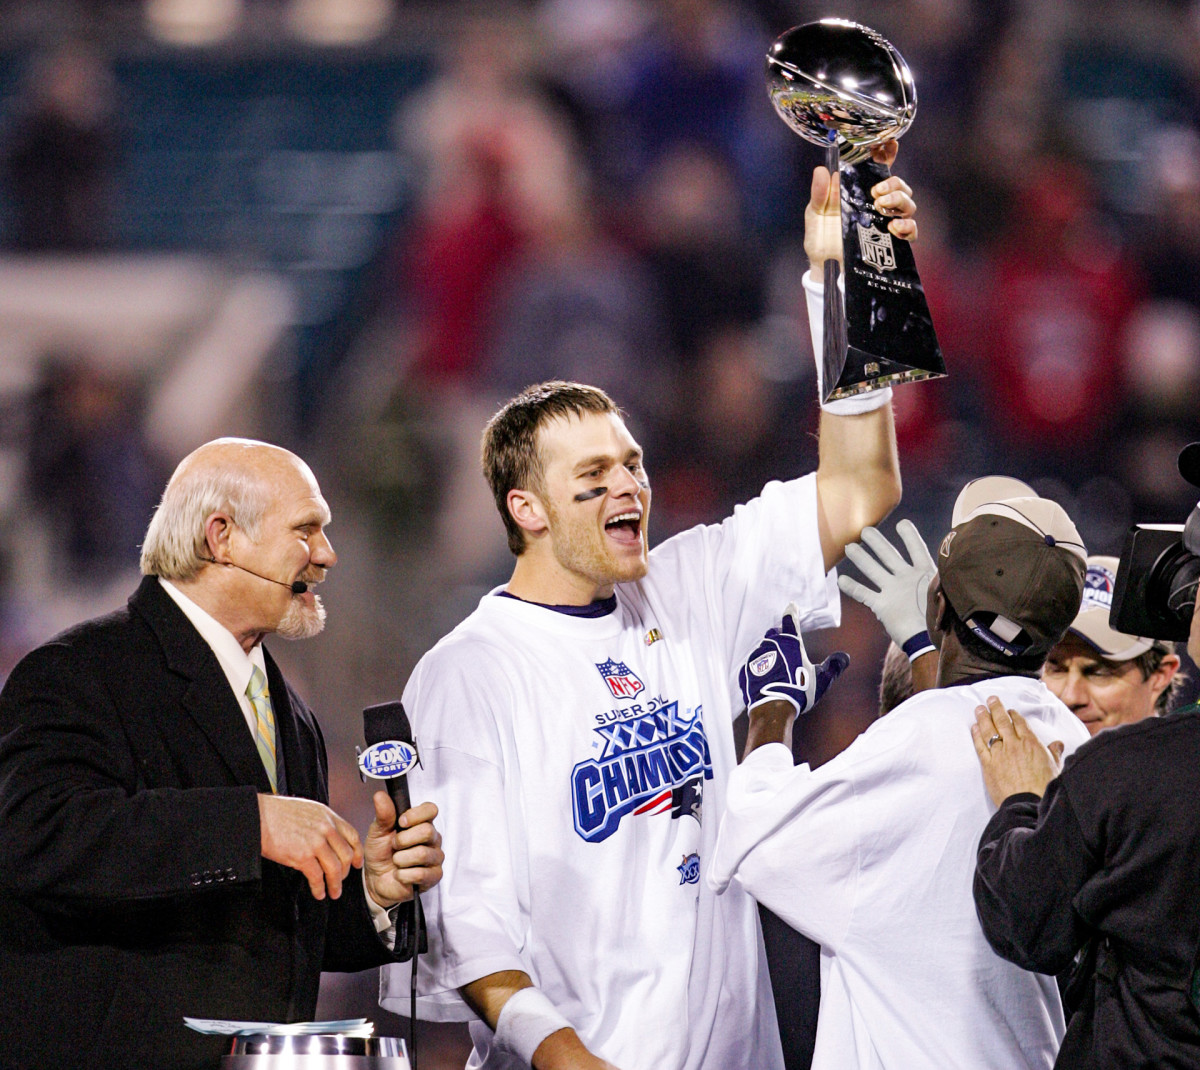 Tom Brady lifts the Lombardi Trophy after winning Super Bowl XXXIX, New England's second straight title